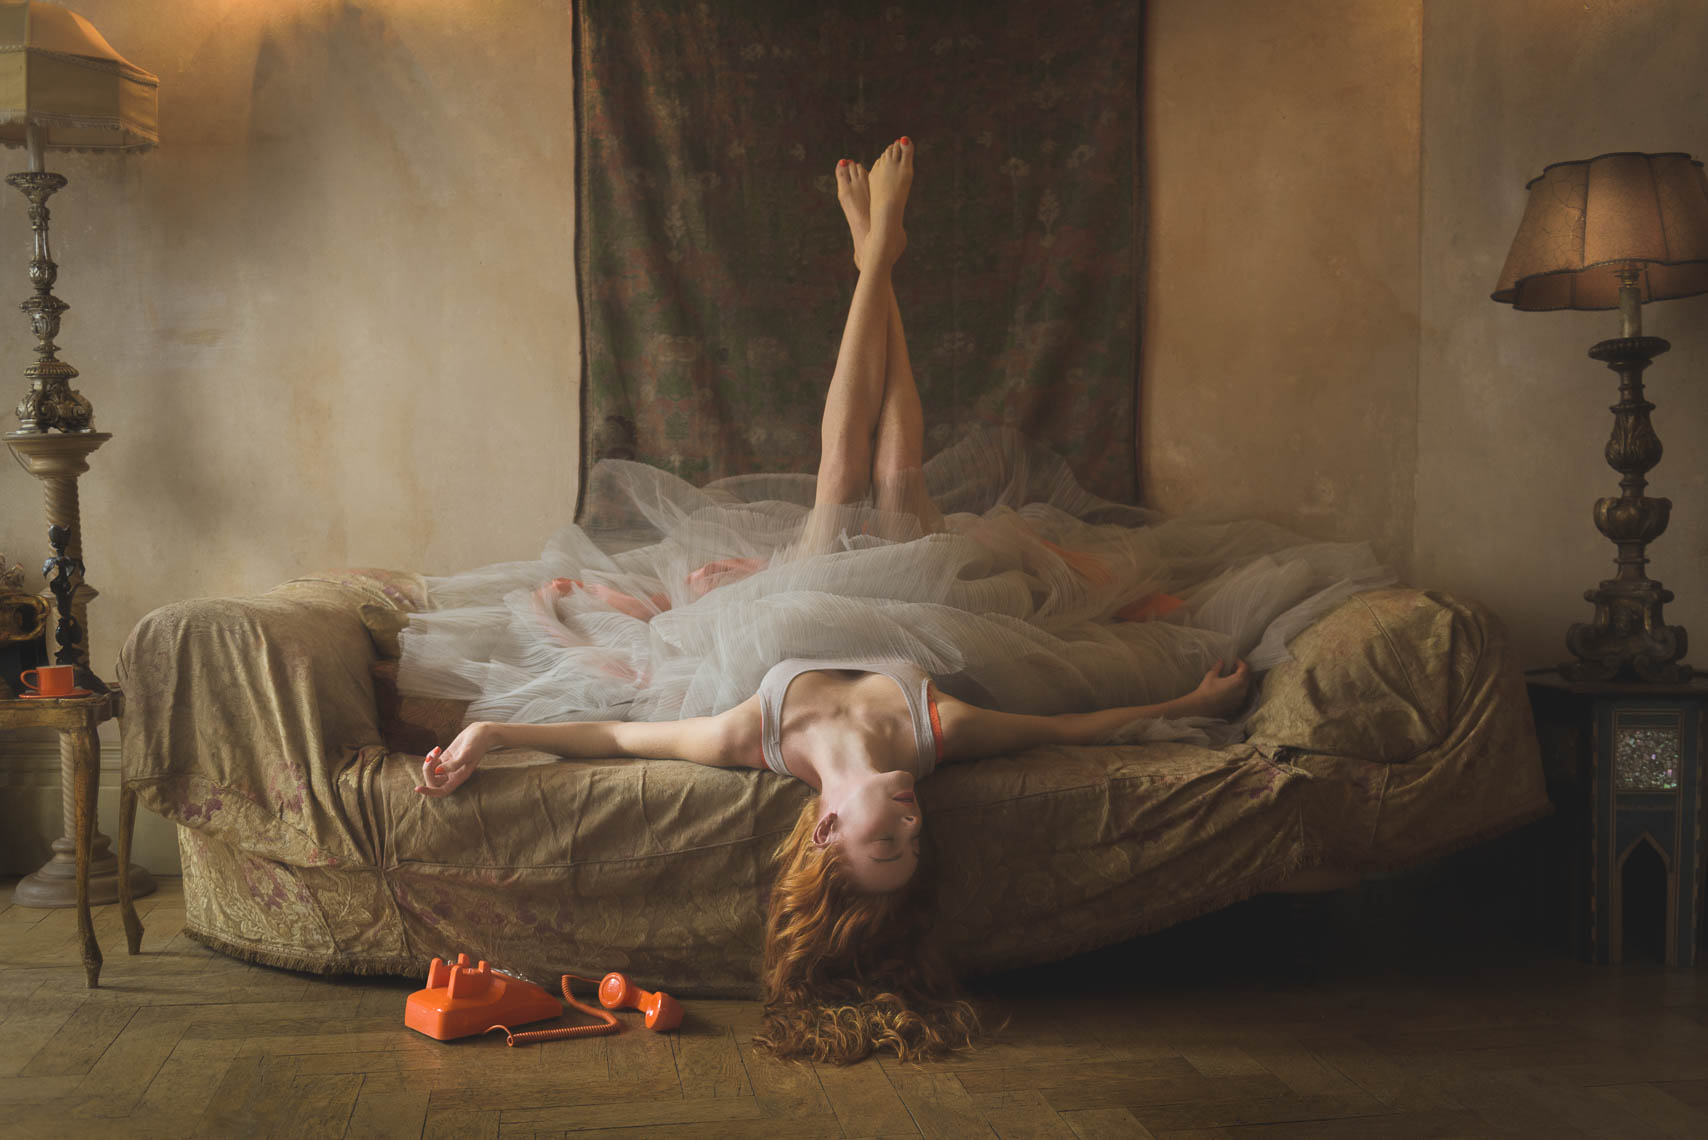 Red hair model lying on a couch with orange telephone on the floor photographed by Marc Rogoff (Fashion Image for Fragrance Brand Romilly Wilde)